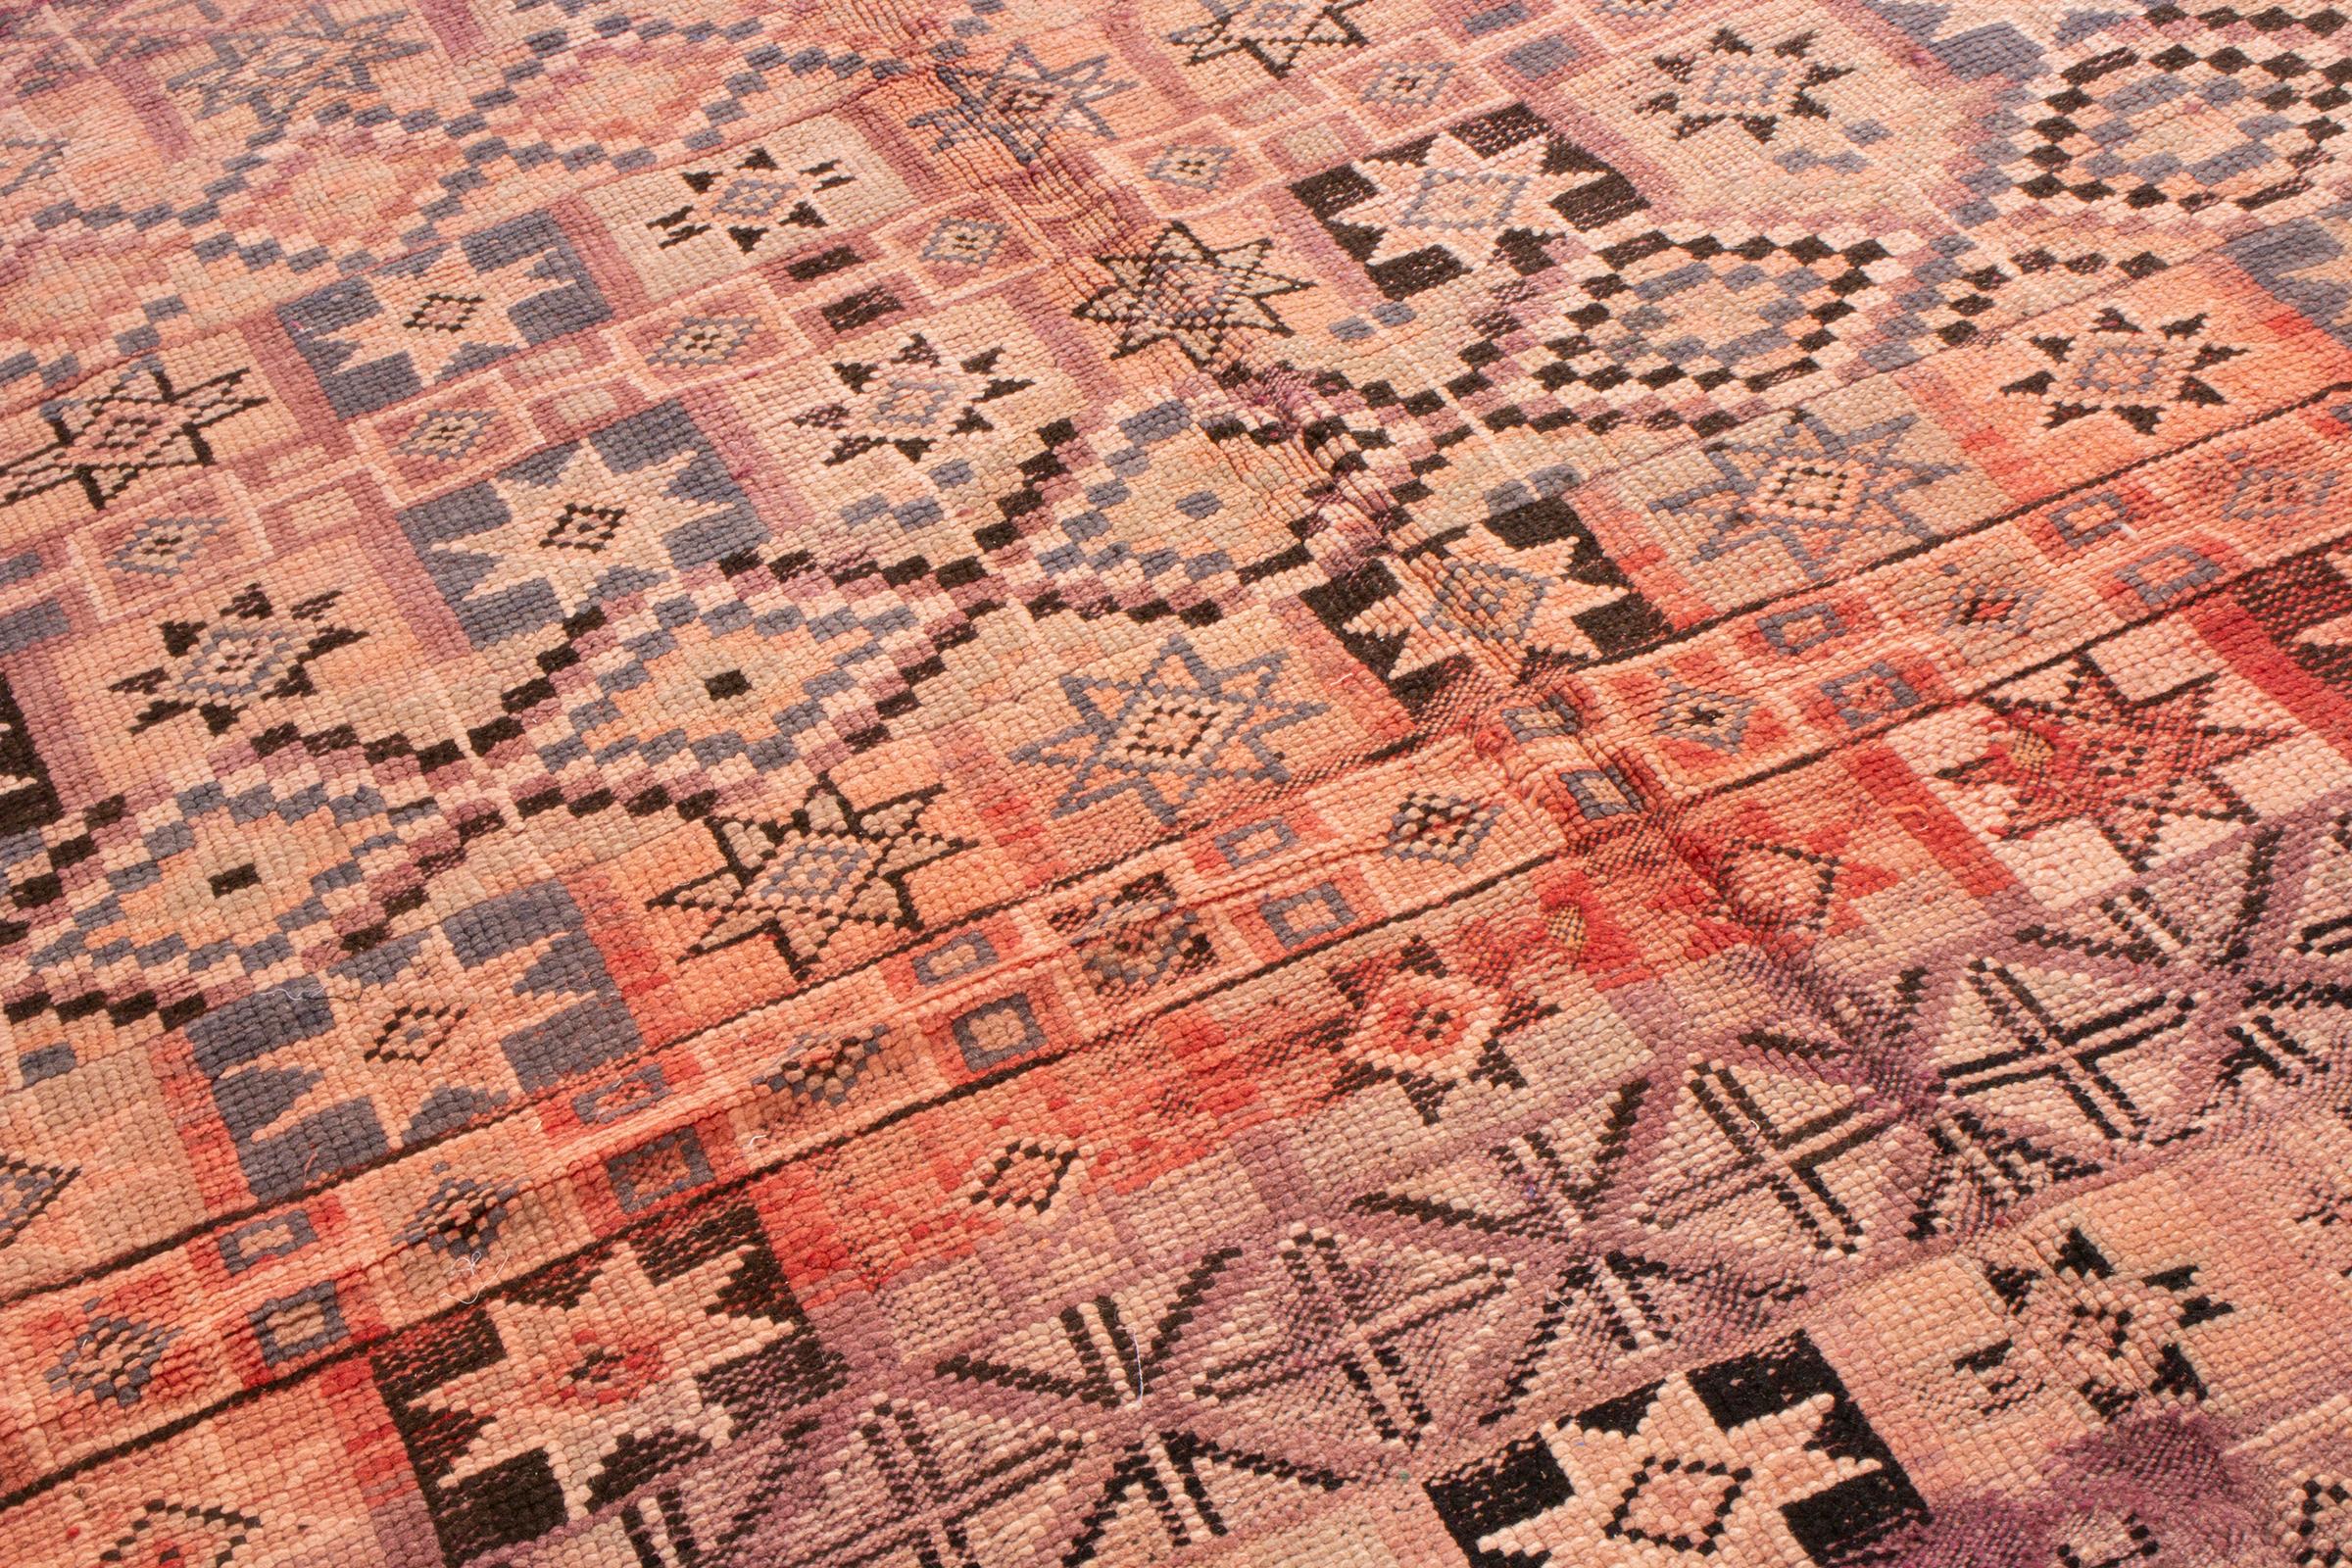 Hand-Knotted 1950s Vintage Midcentury Moroccan Rug Beige Pink Tribal Geometric Pattern